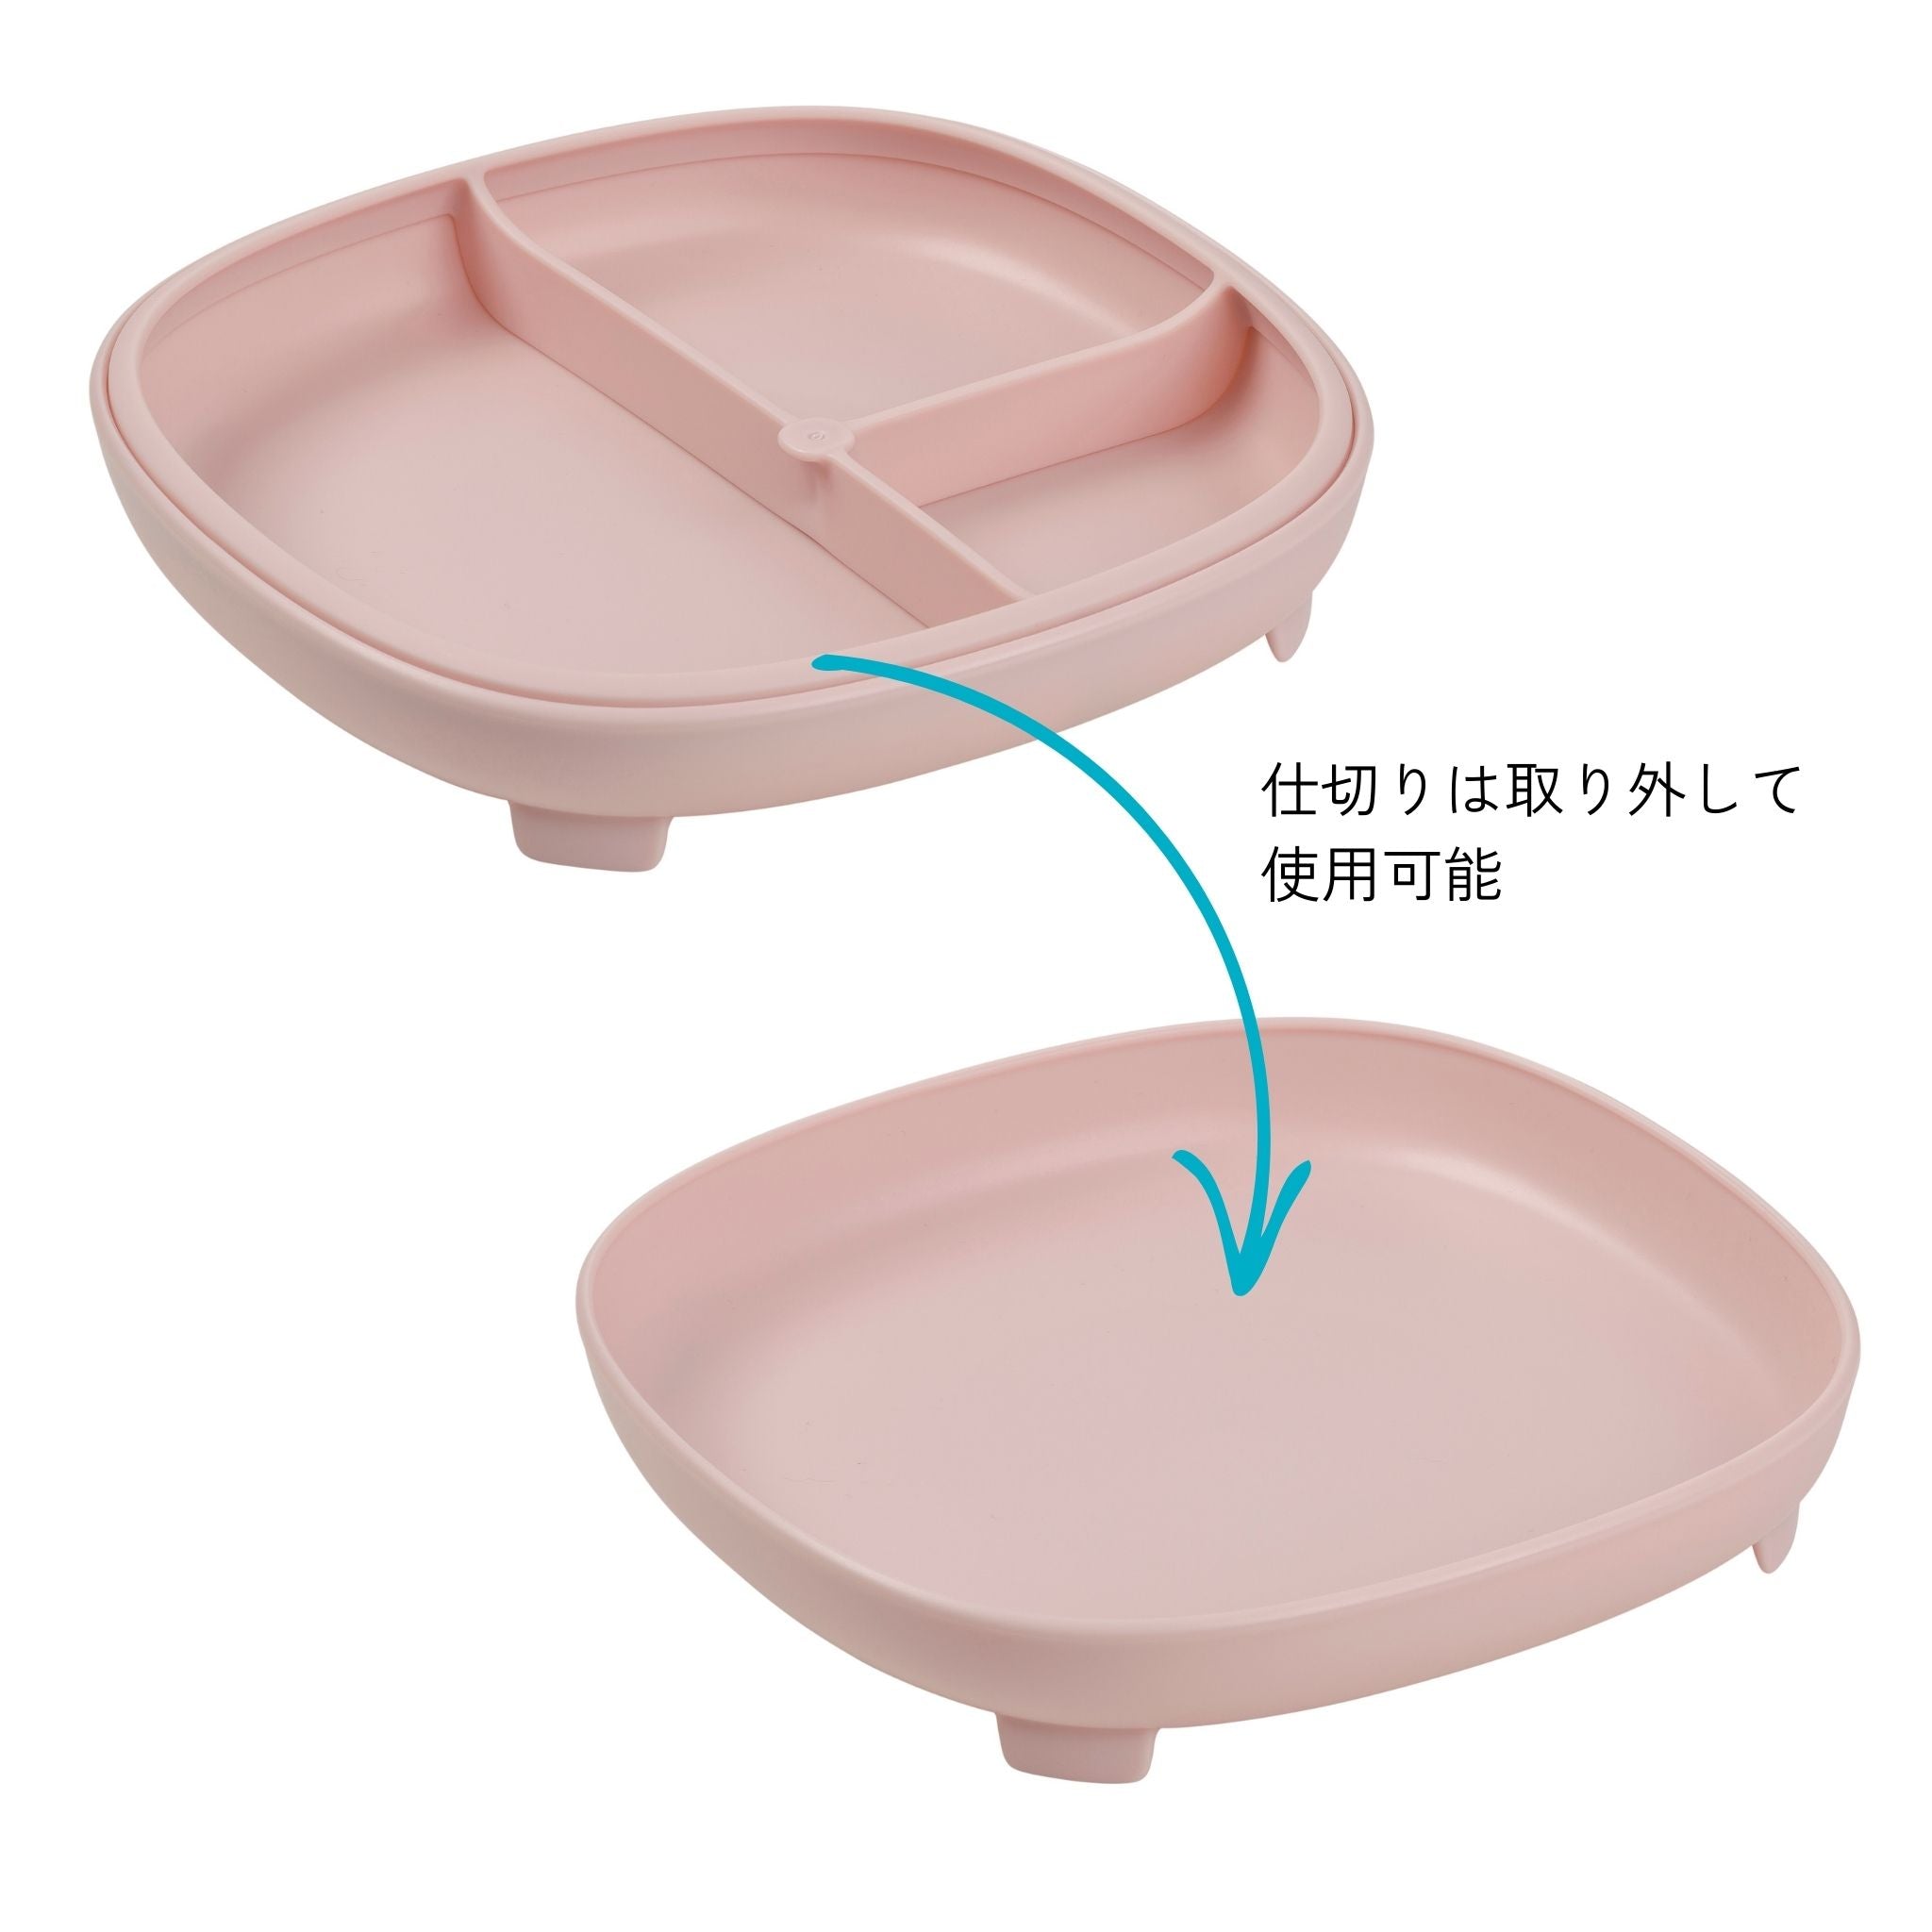 2 in 1 suction plate blush